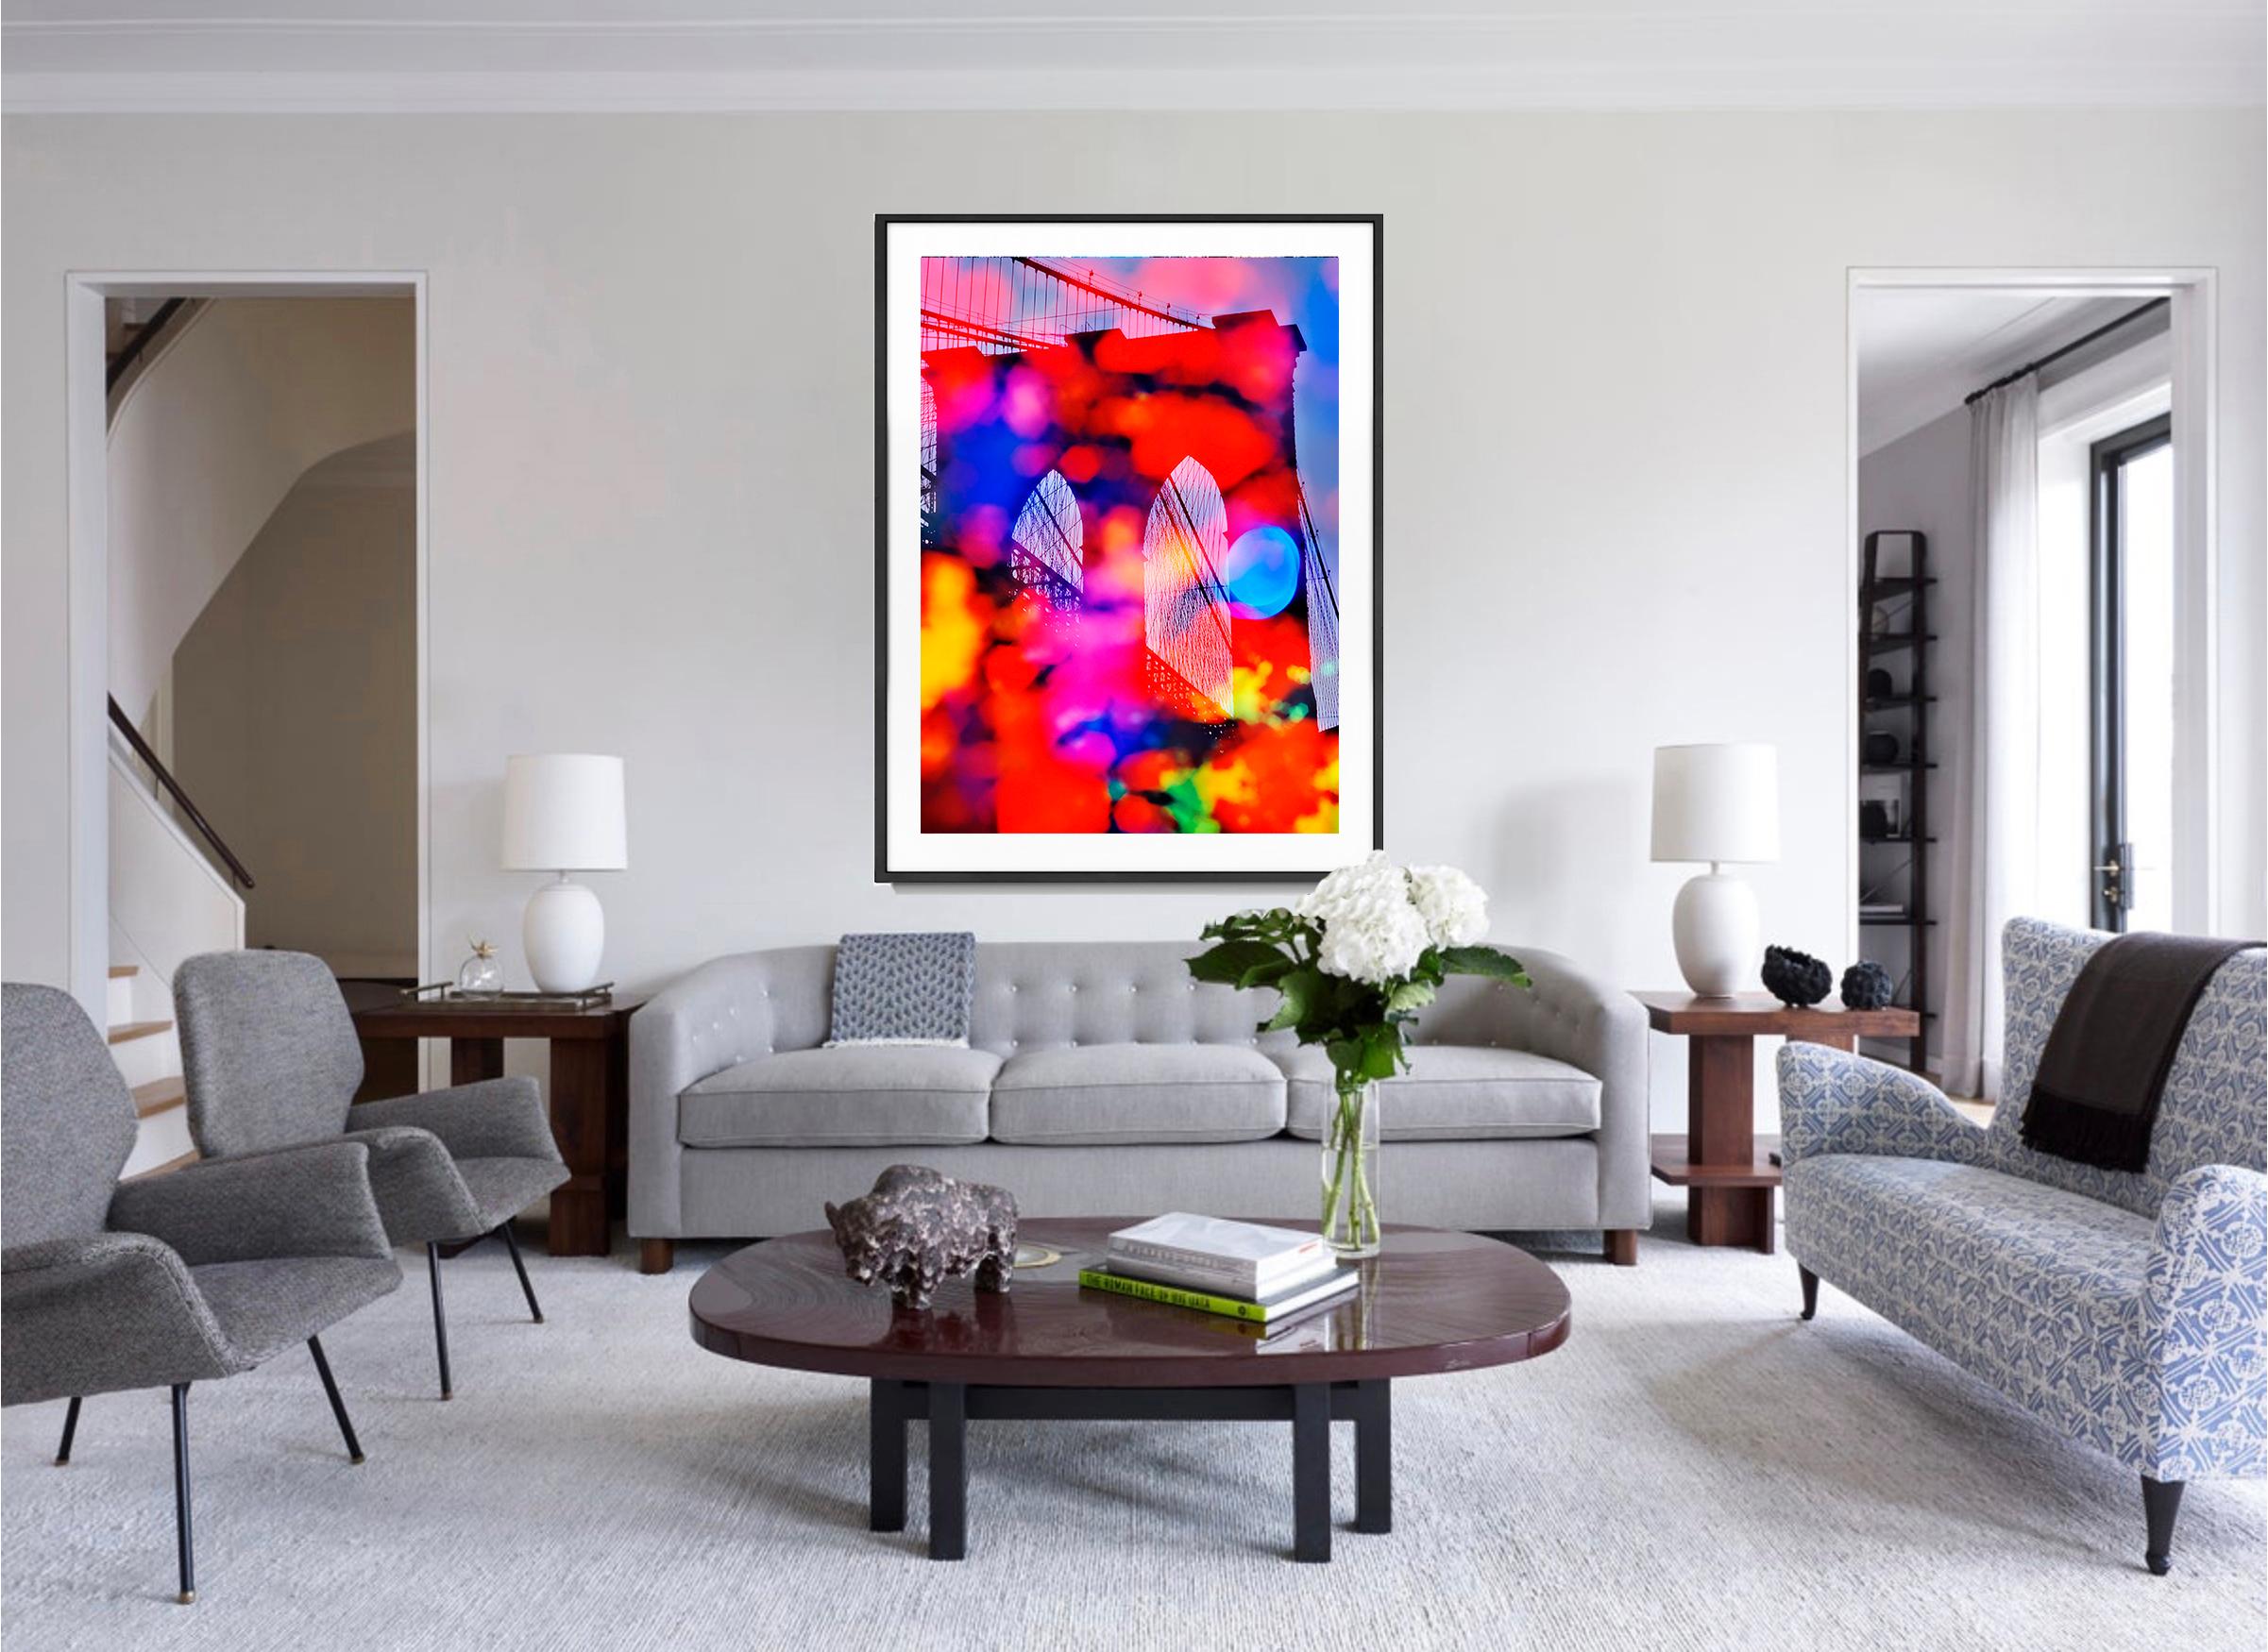 The romantic merges with the classic in  Mitchell Funk's 1970s interpretation of the Brooklyn Bridge. With a long lens, Funk incorporates the emotionally joyful colors of out-of-focus flowers with the soaring classical stone archs of the Brooklyn